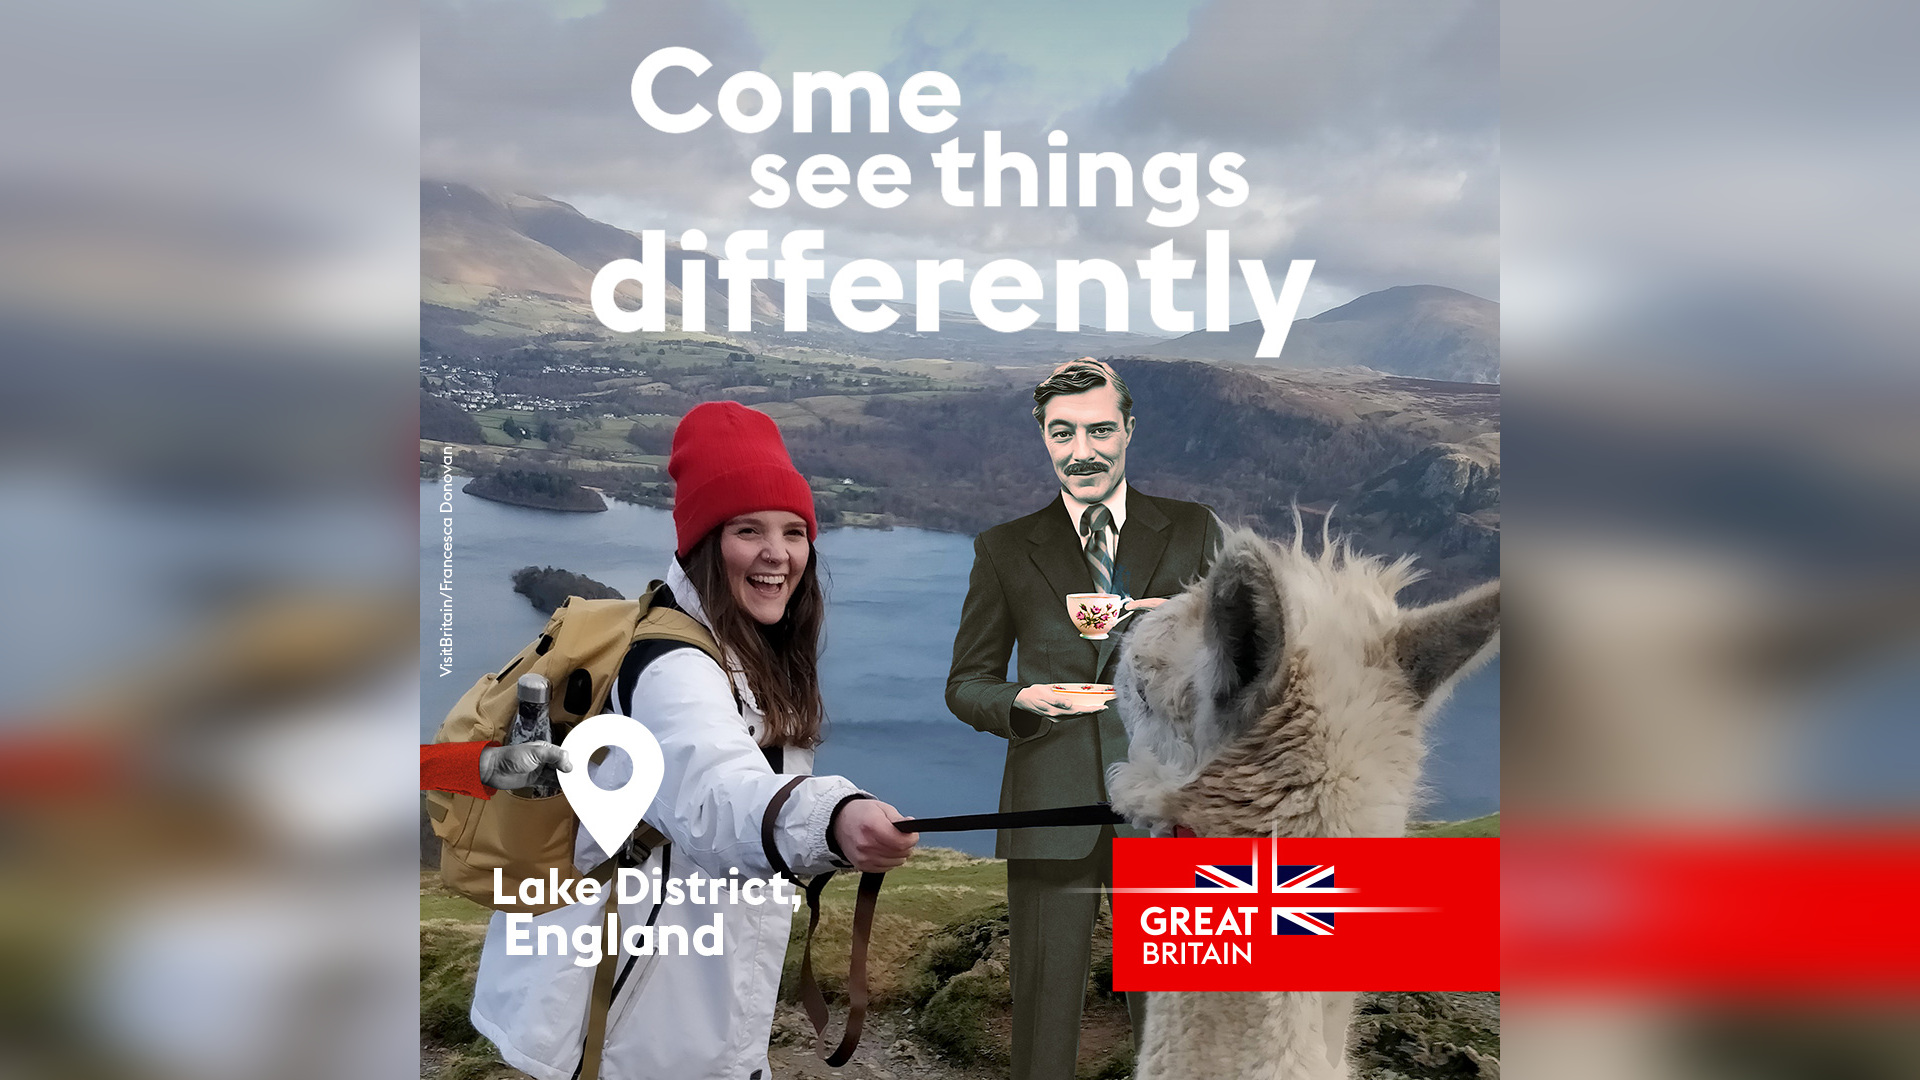 VisitBritain 'See Things Differently' Campaign, a GCC Invitation to Explore Great Britain